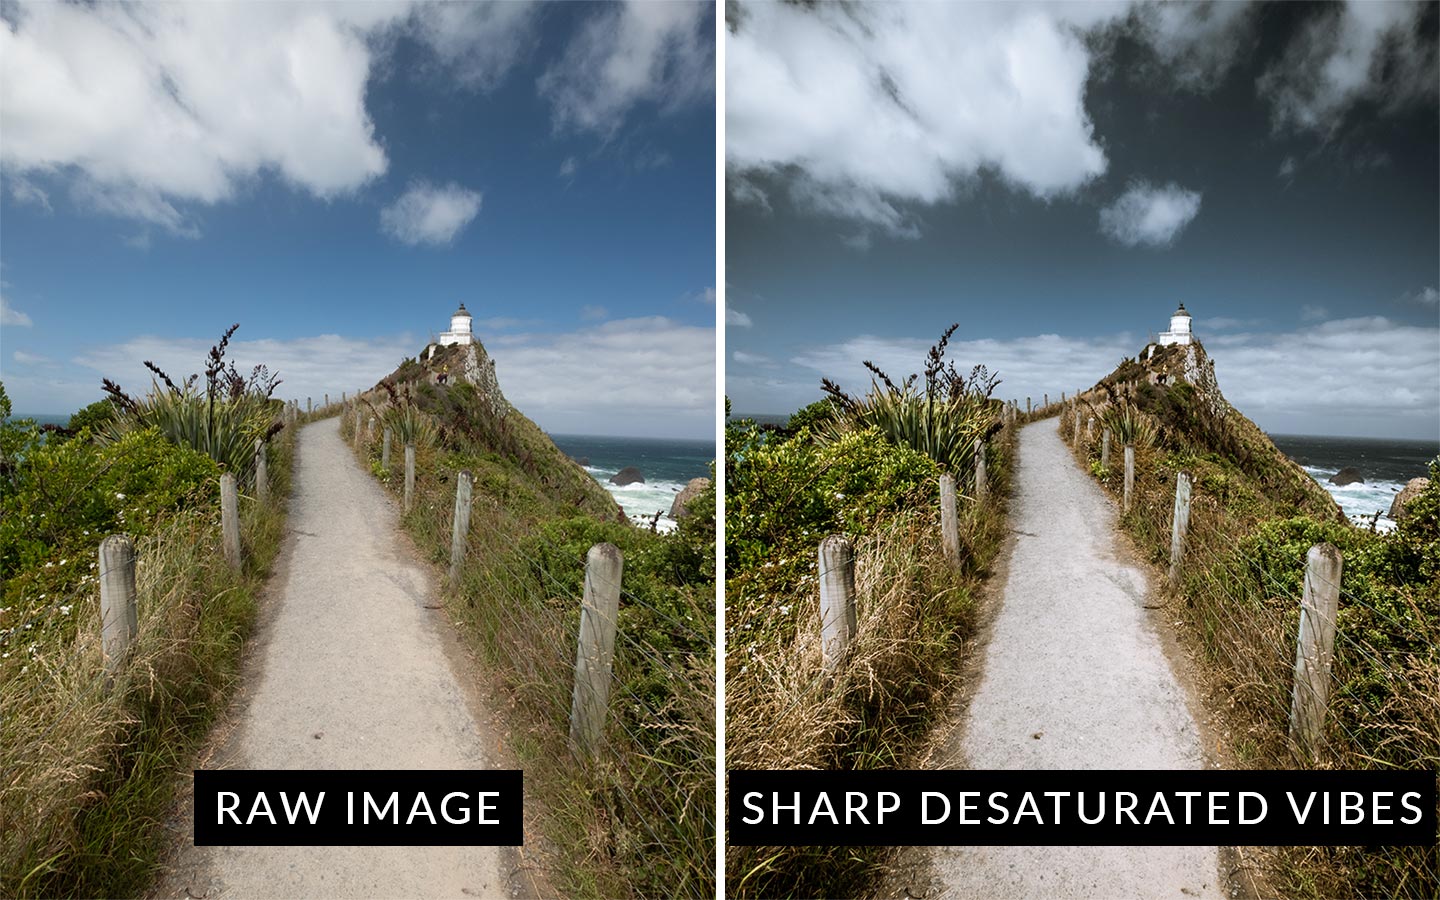 A before and after comparison showing the Sharp Desaturated Vibes preset which is included in this moody Lightroom presets package.